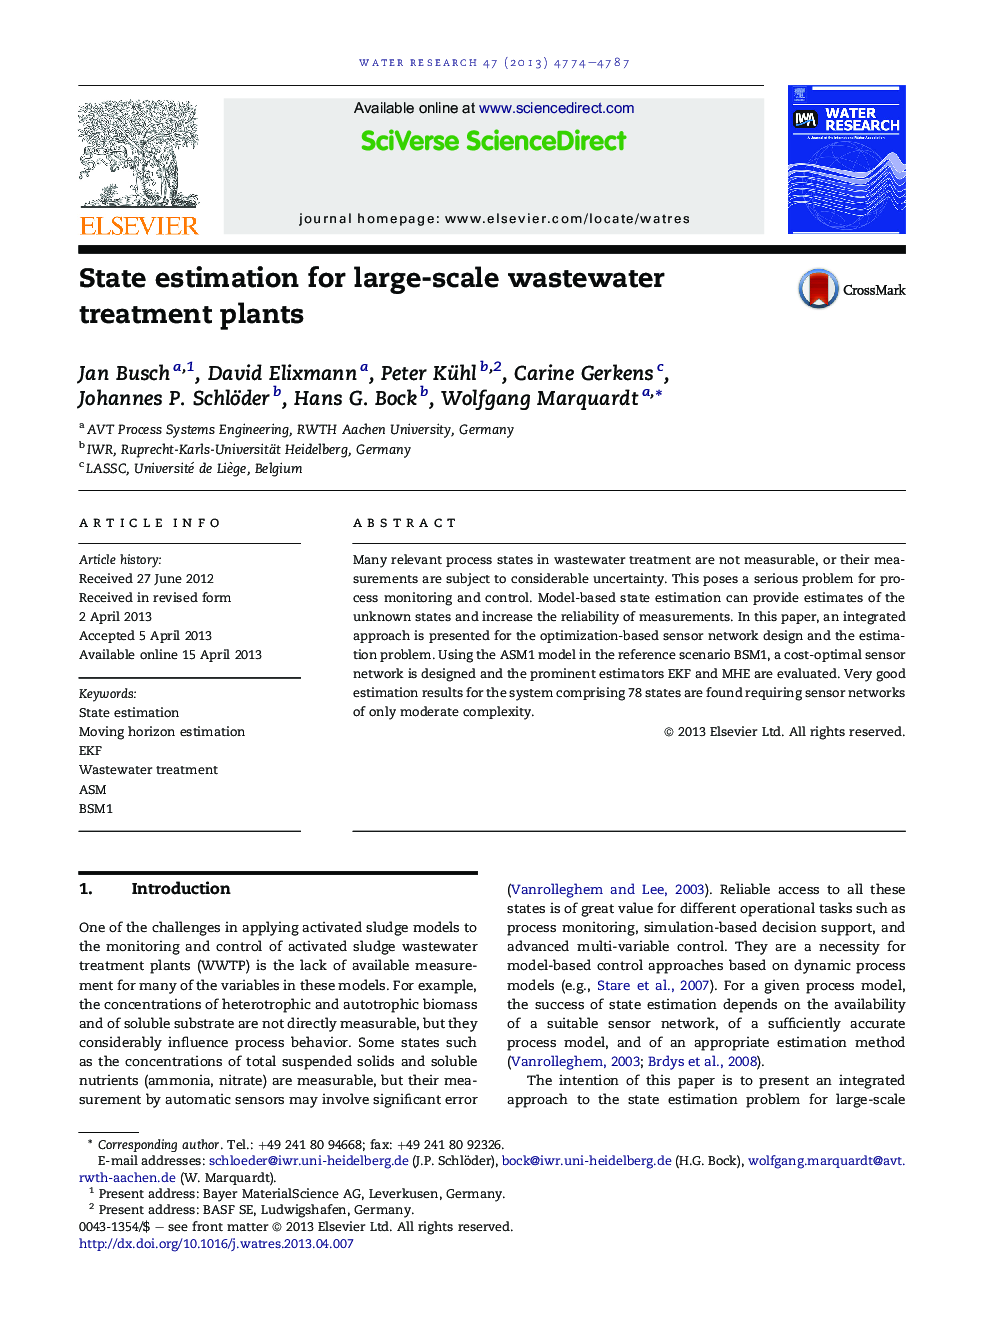 State estimation for large-scale wastewater treatment plants